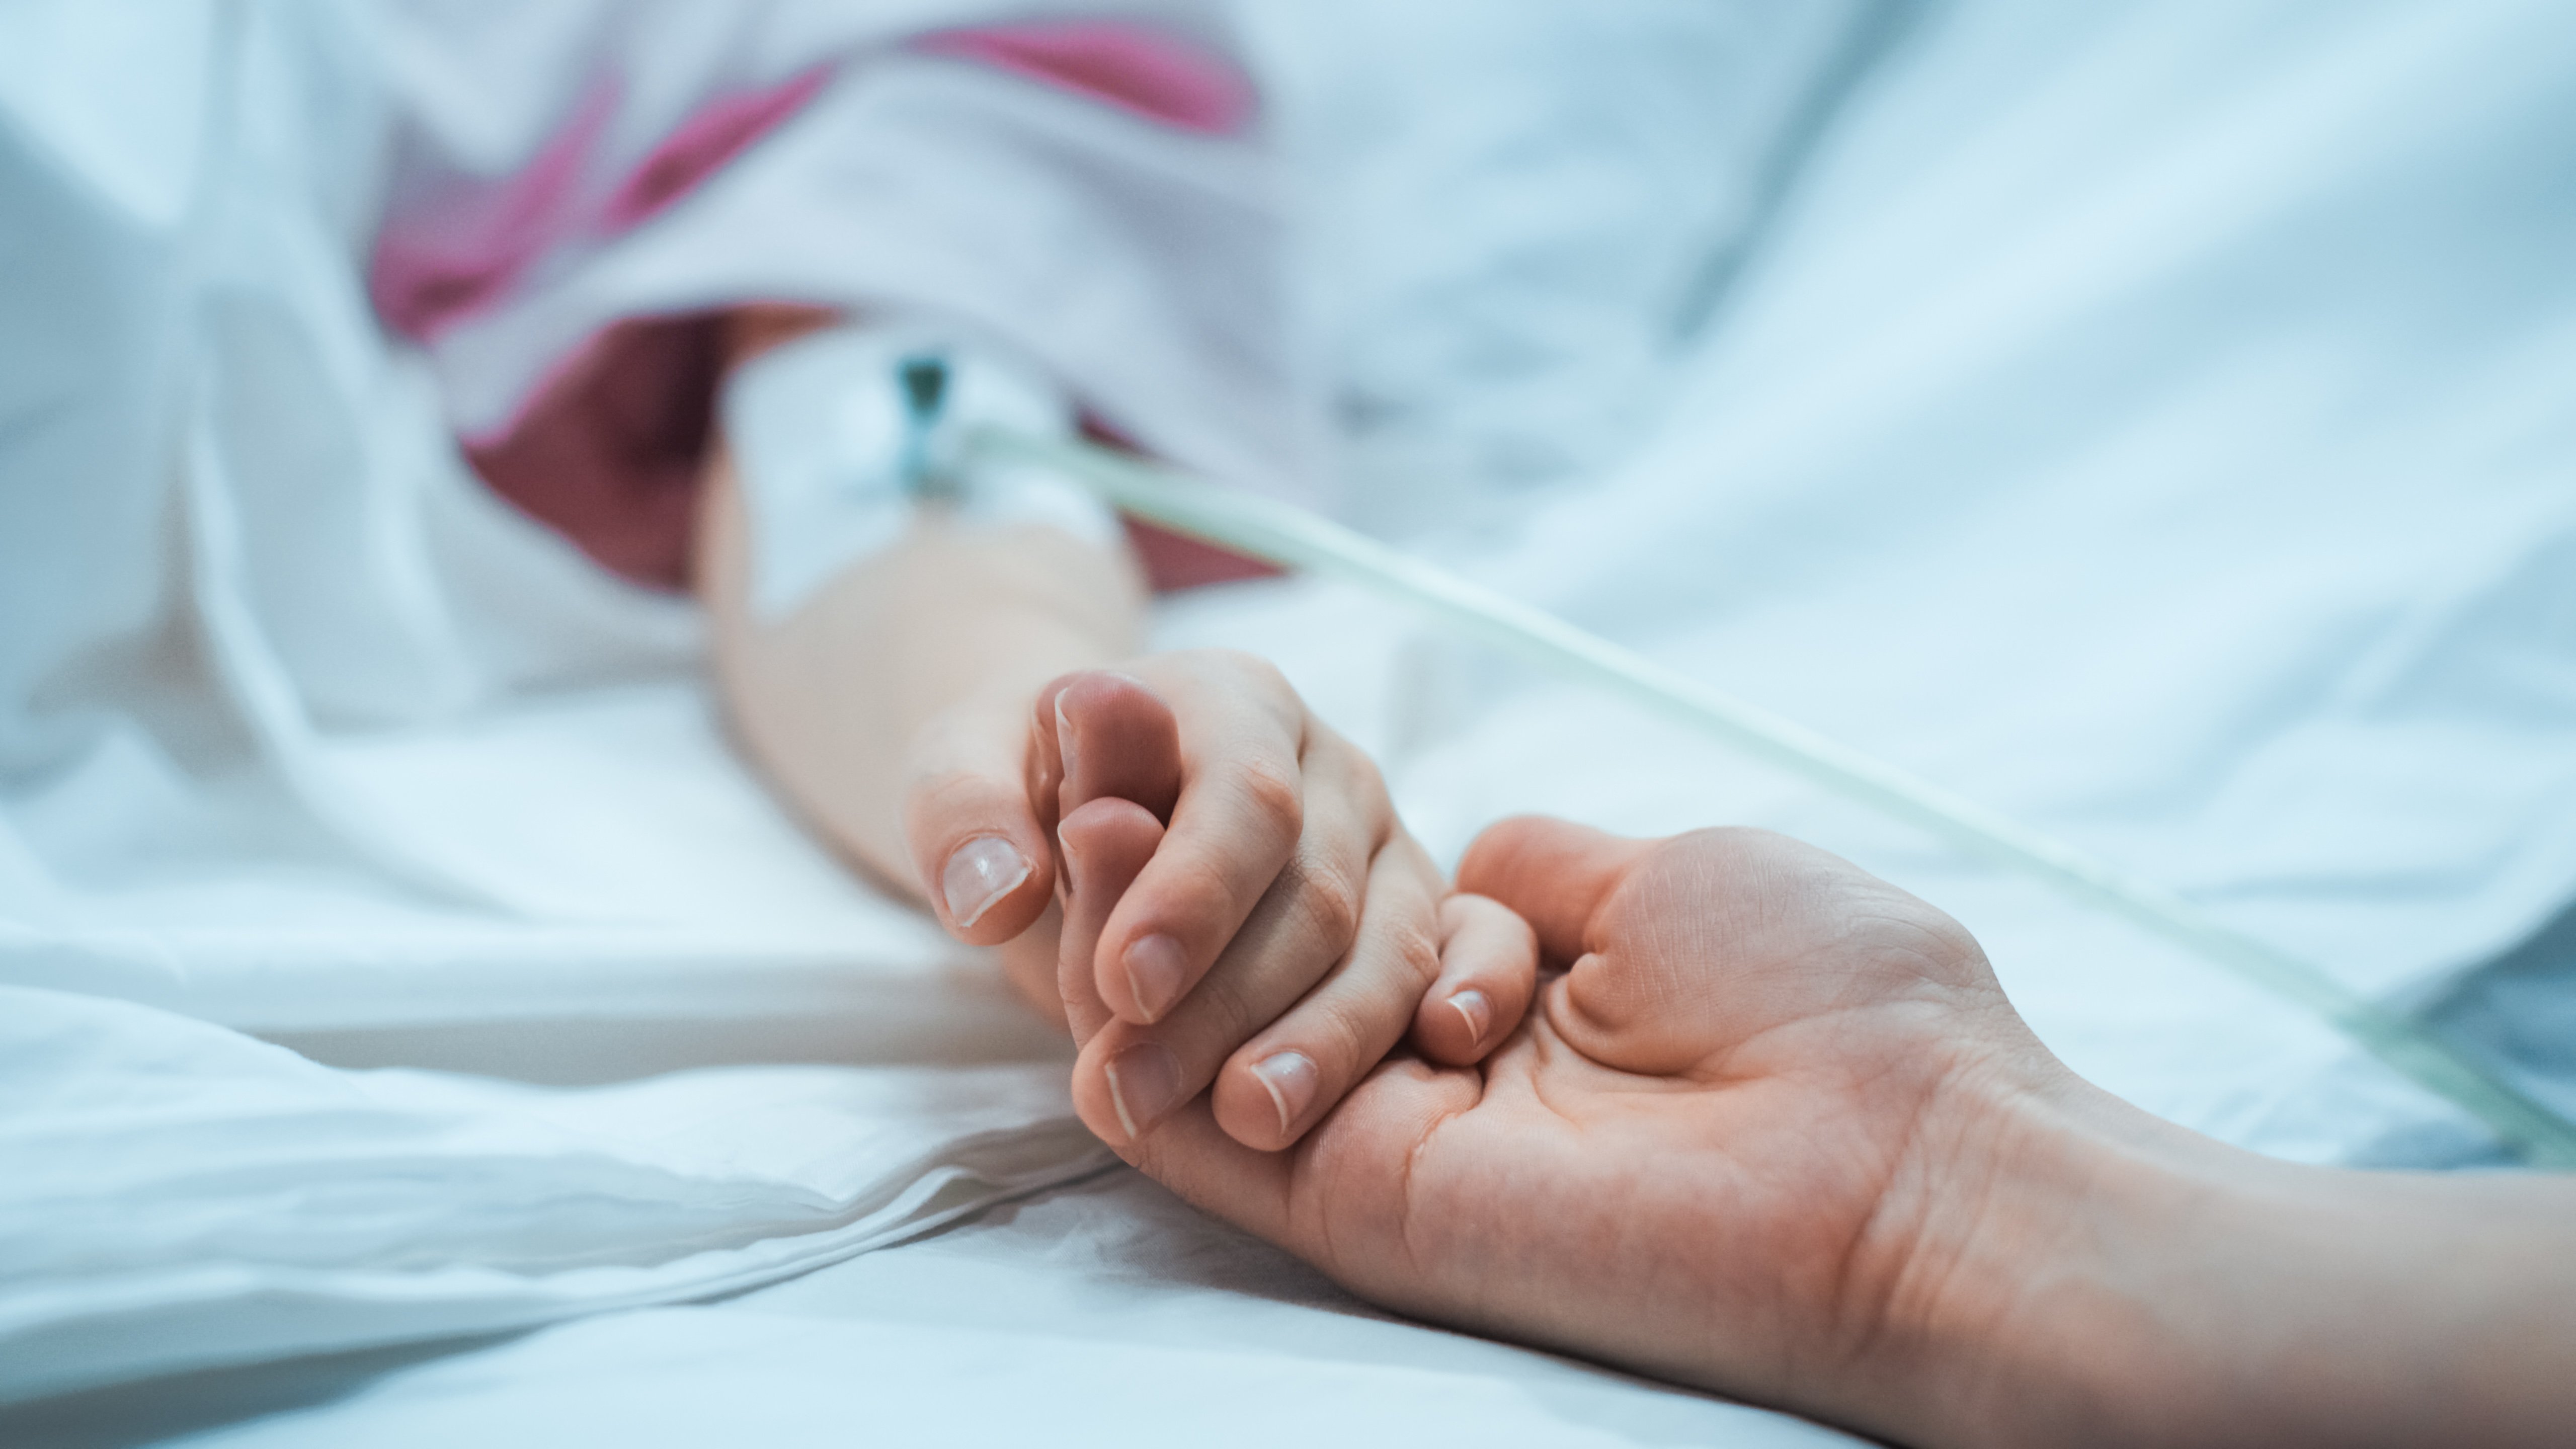 photo of child lying in the hospital bed sleeping with parent holding the childs hand comforting